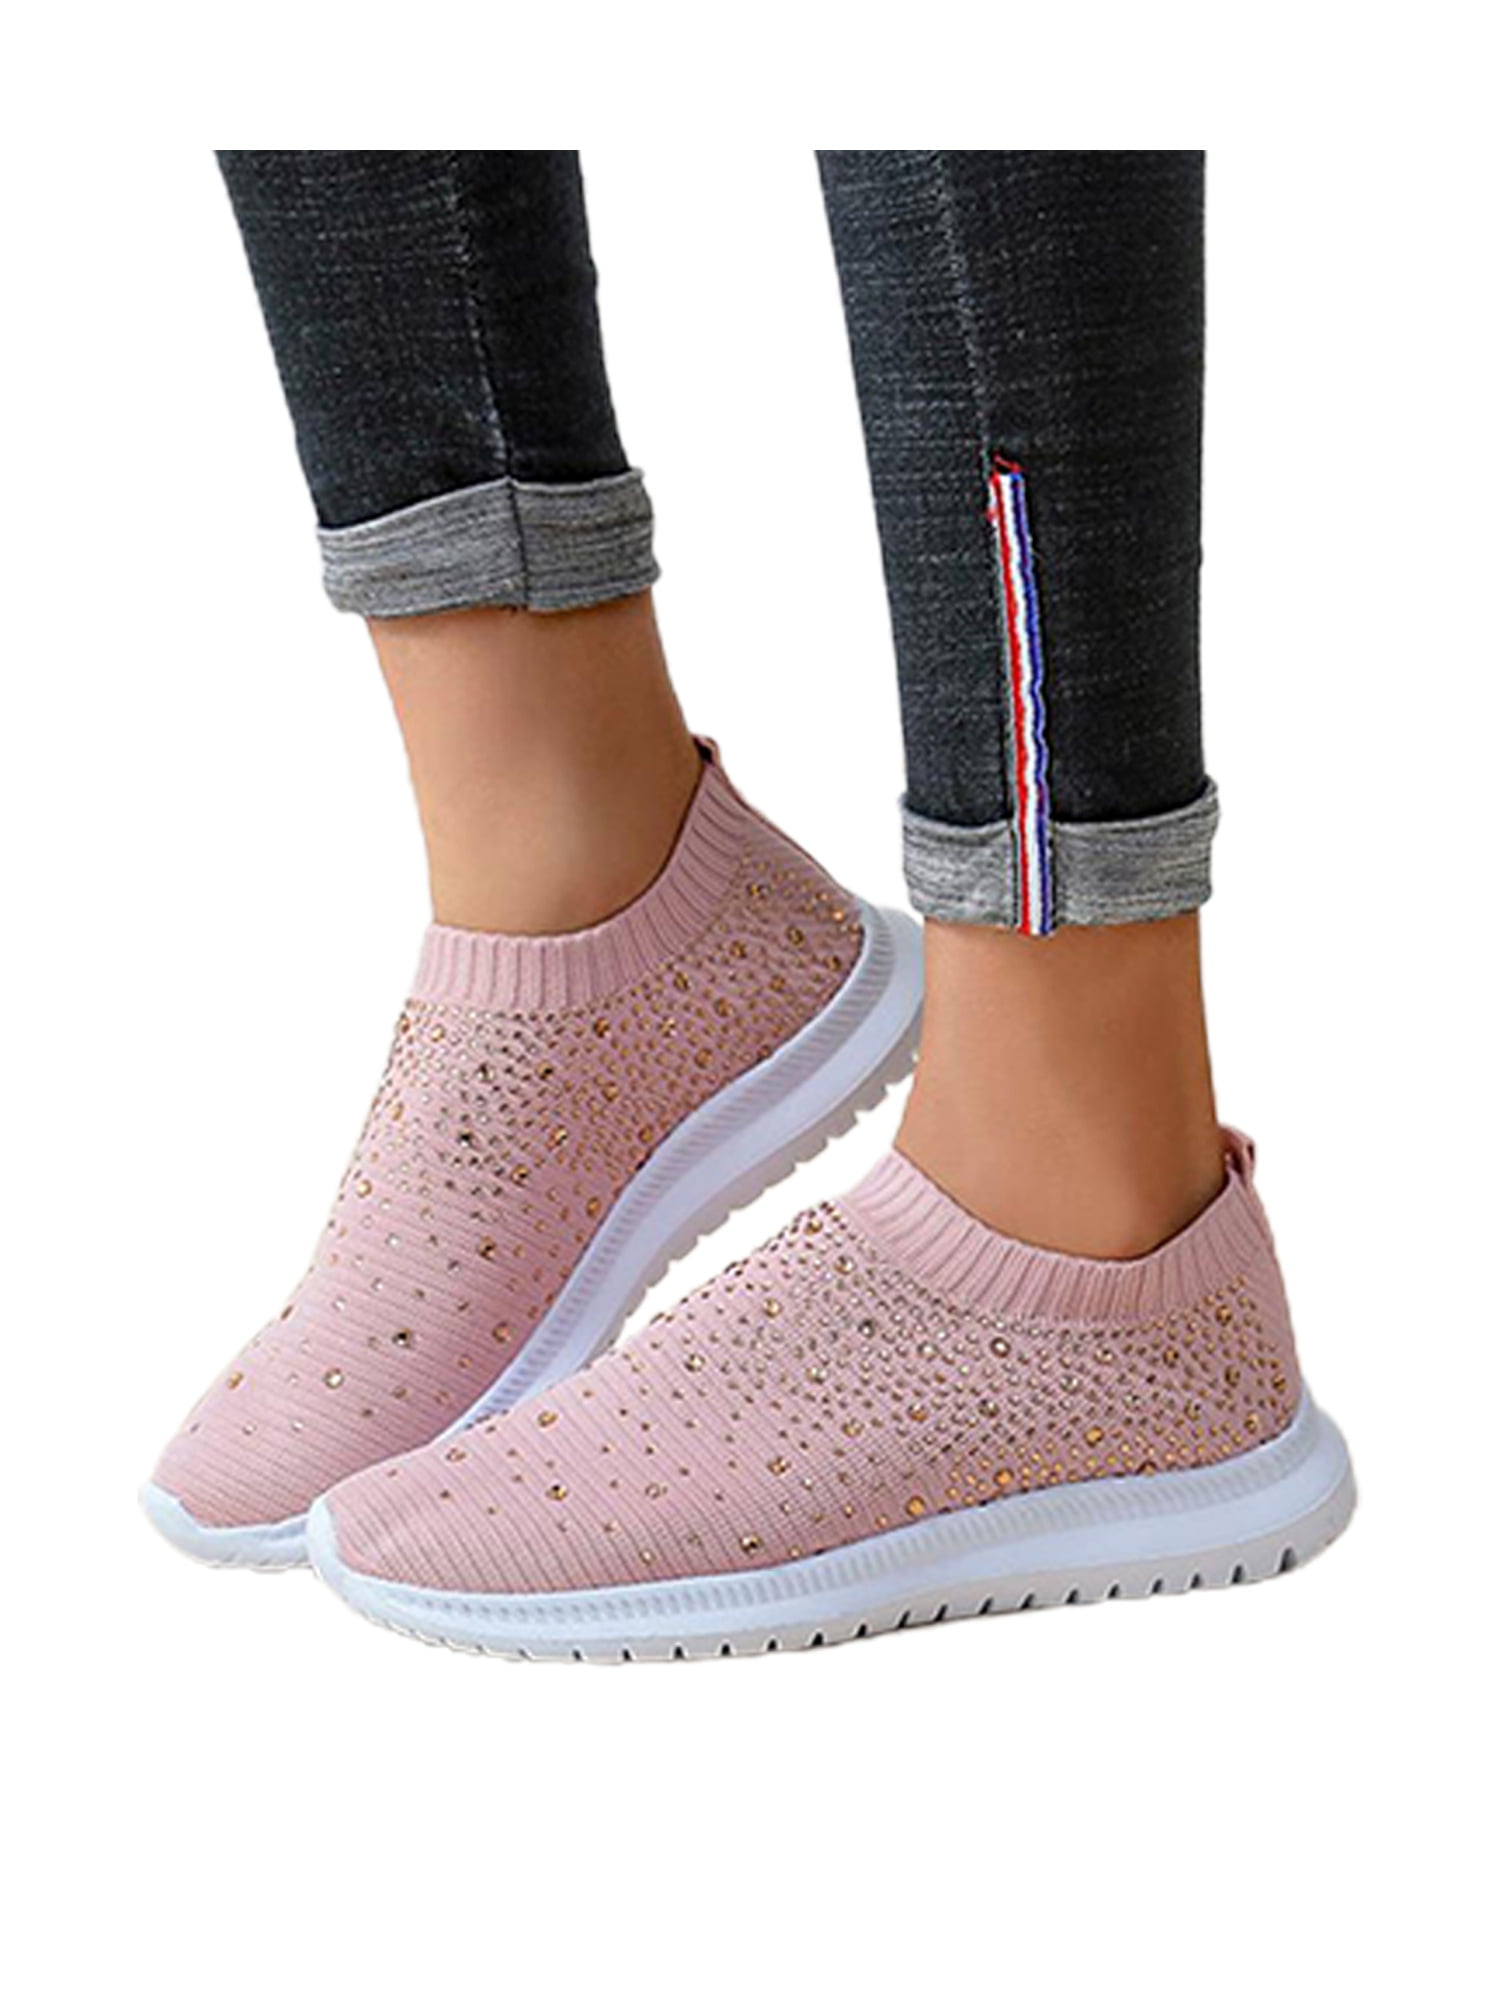 Nevera Sock Sneakers Shoes for Women Casual Fashion Bling Sequins Sneakers Cozy Slip On Flats Shoe Plus Size 